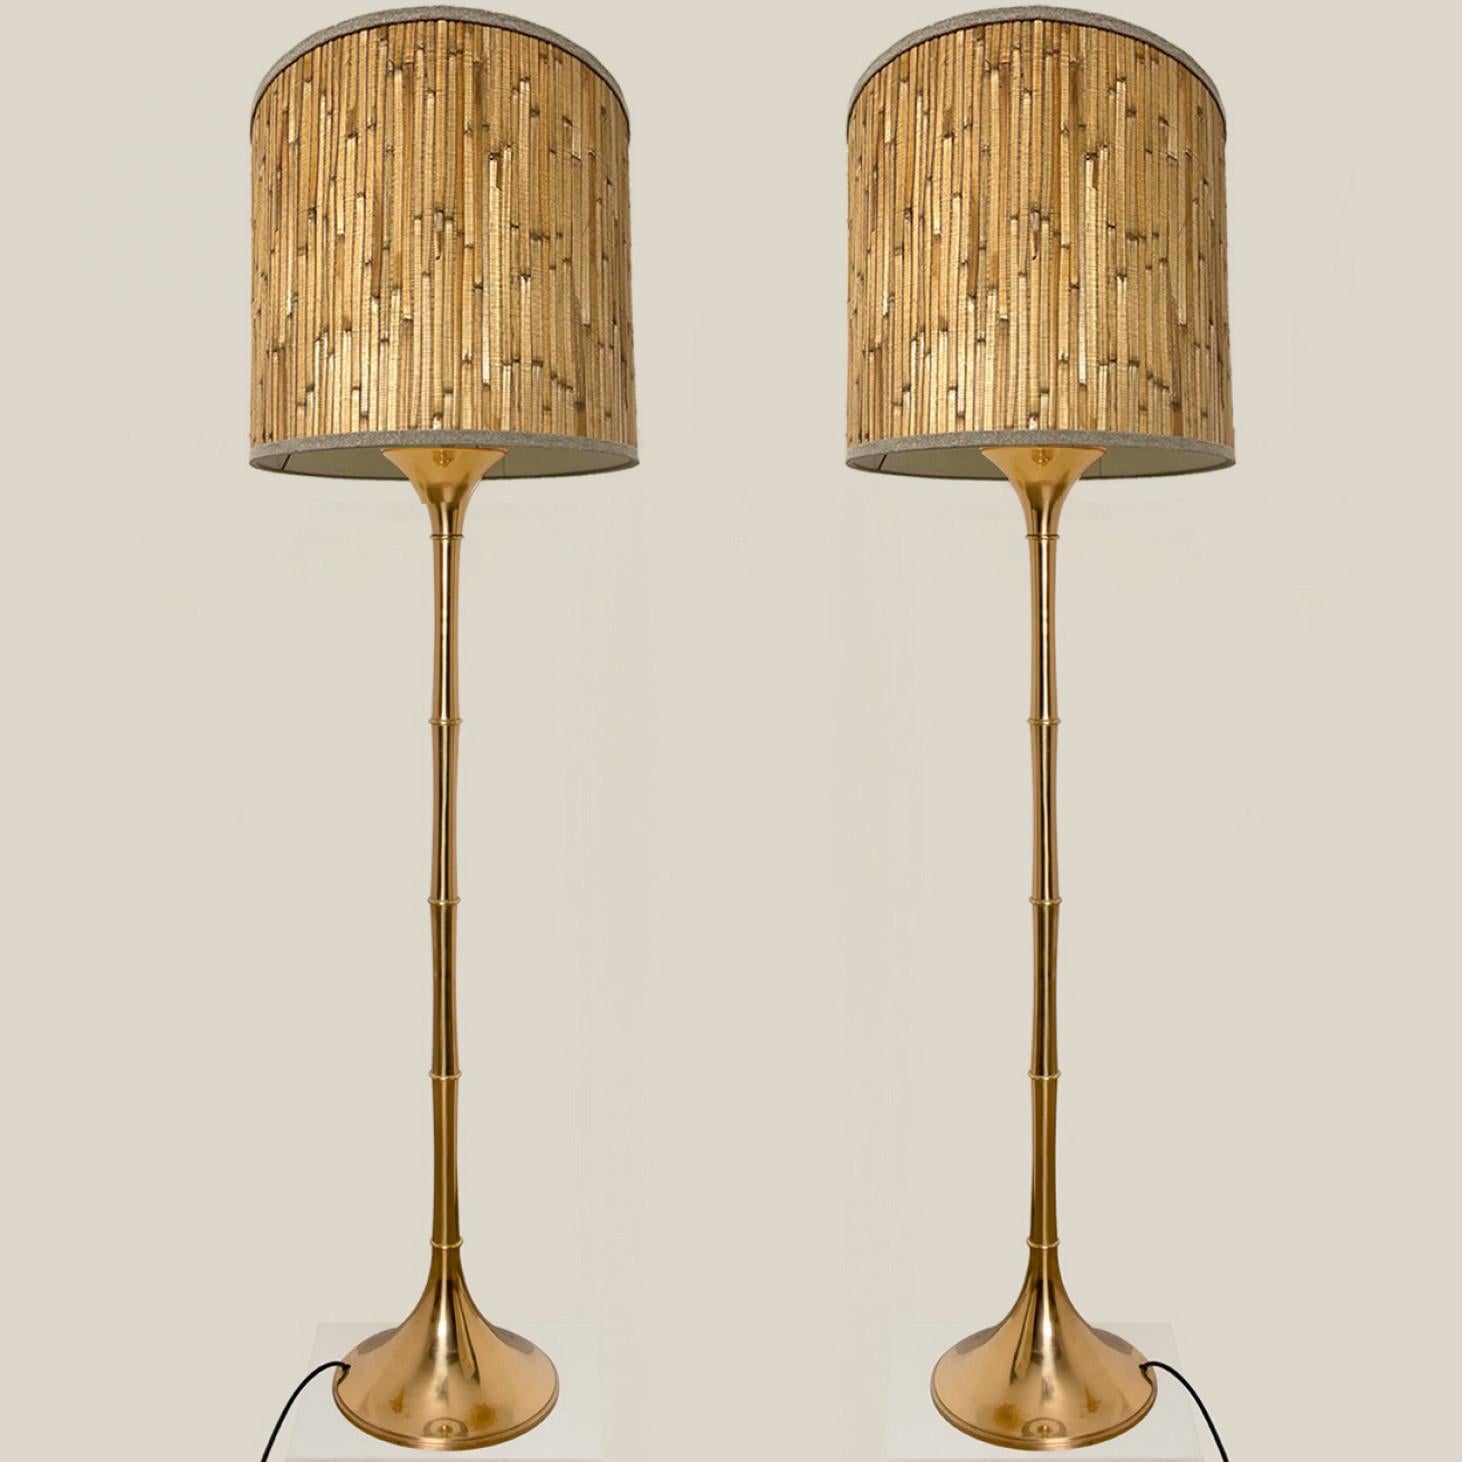 Pair of Table Lamps Gold Brass and Bamboo by Ingo Maurer, Europe, Germany, 1968 For Sale 4